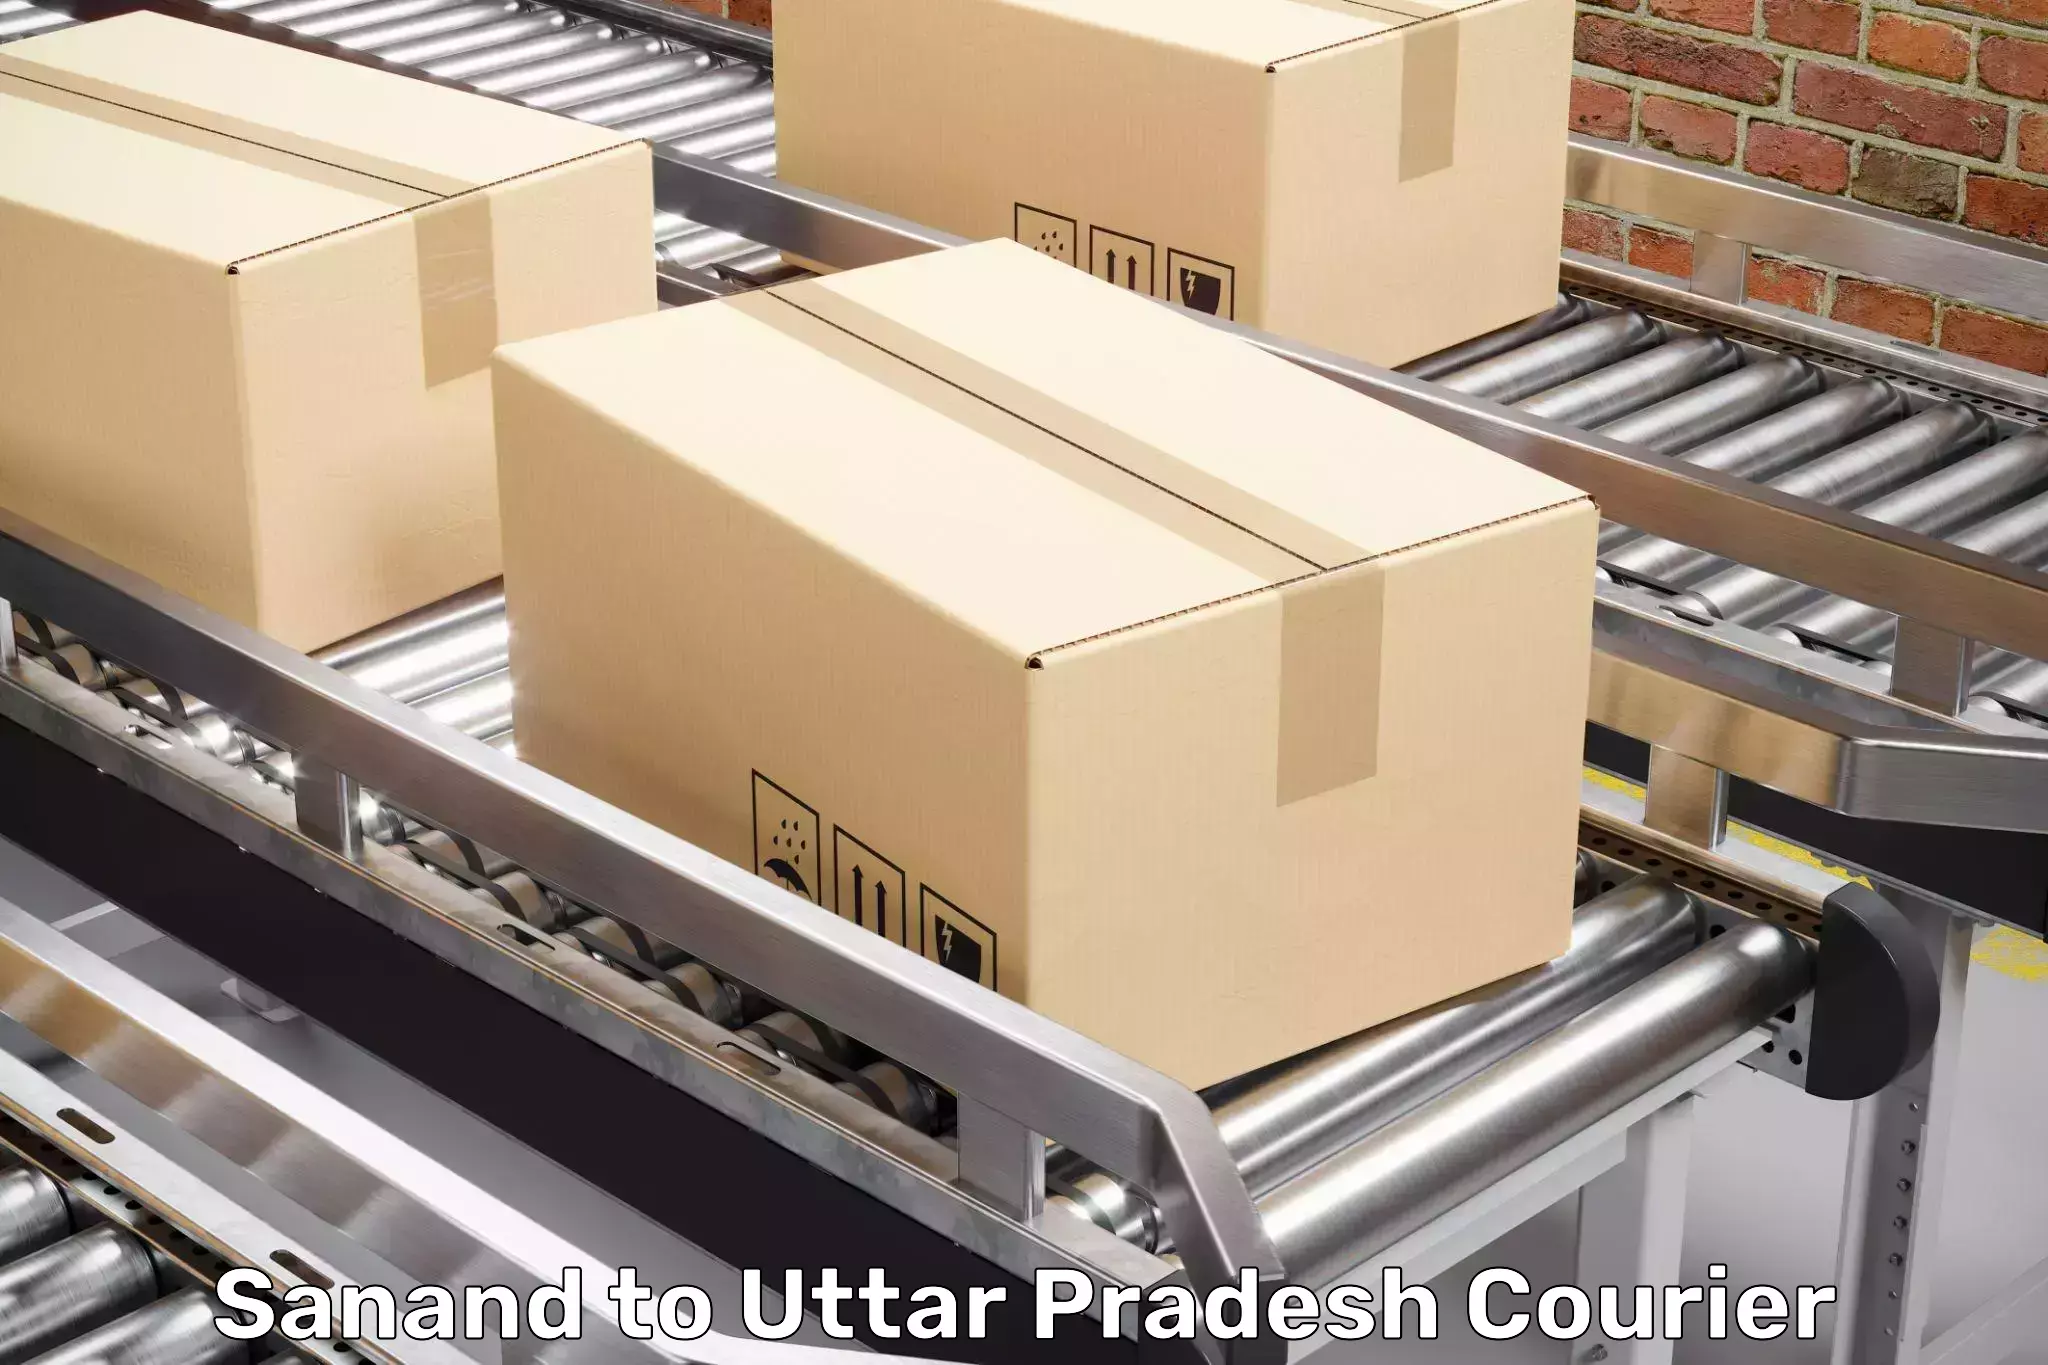 Moving and packing experts Sanand to Agra